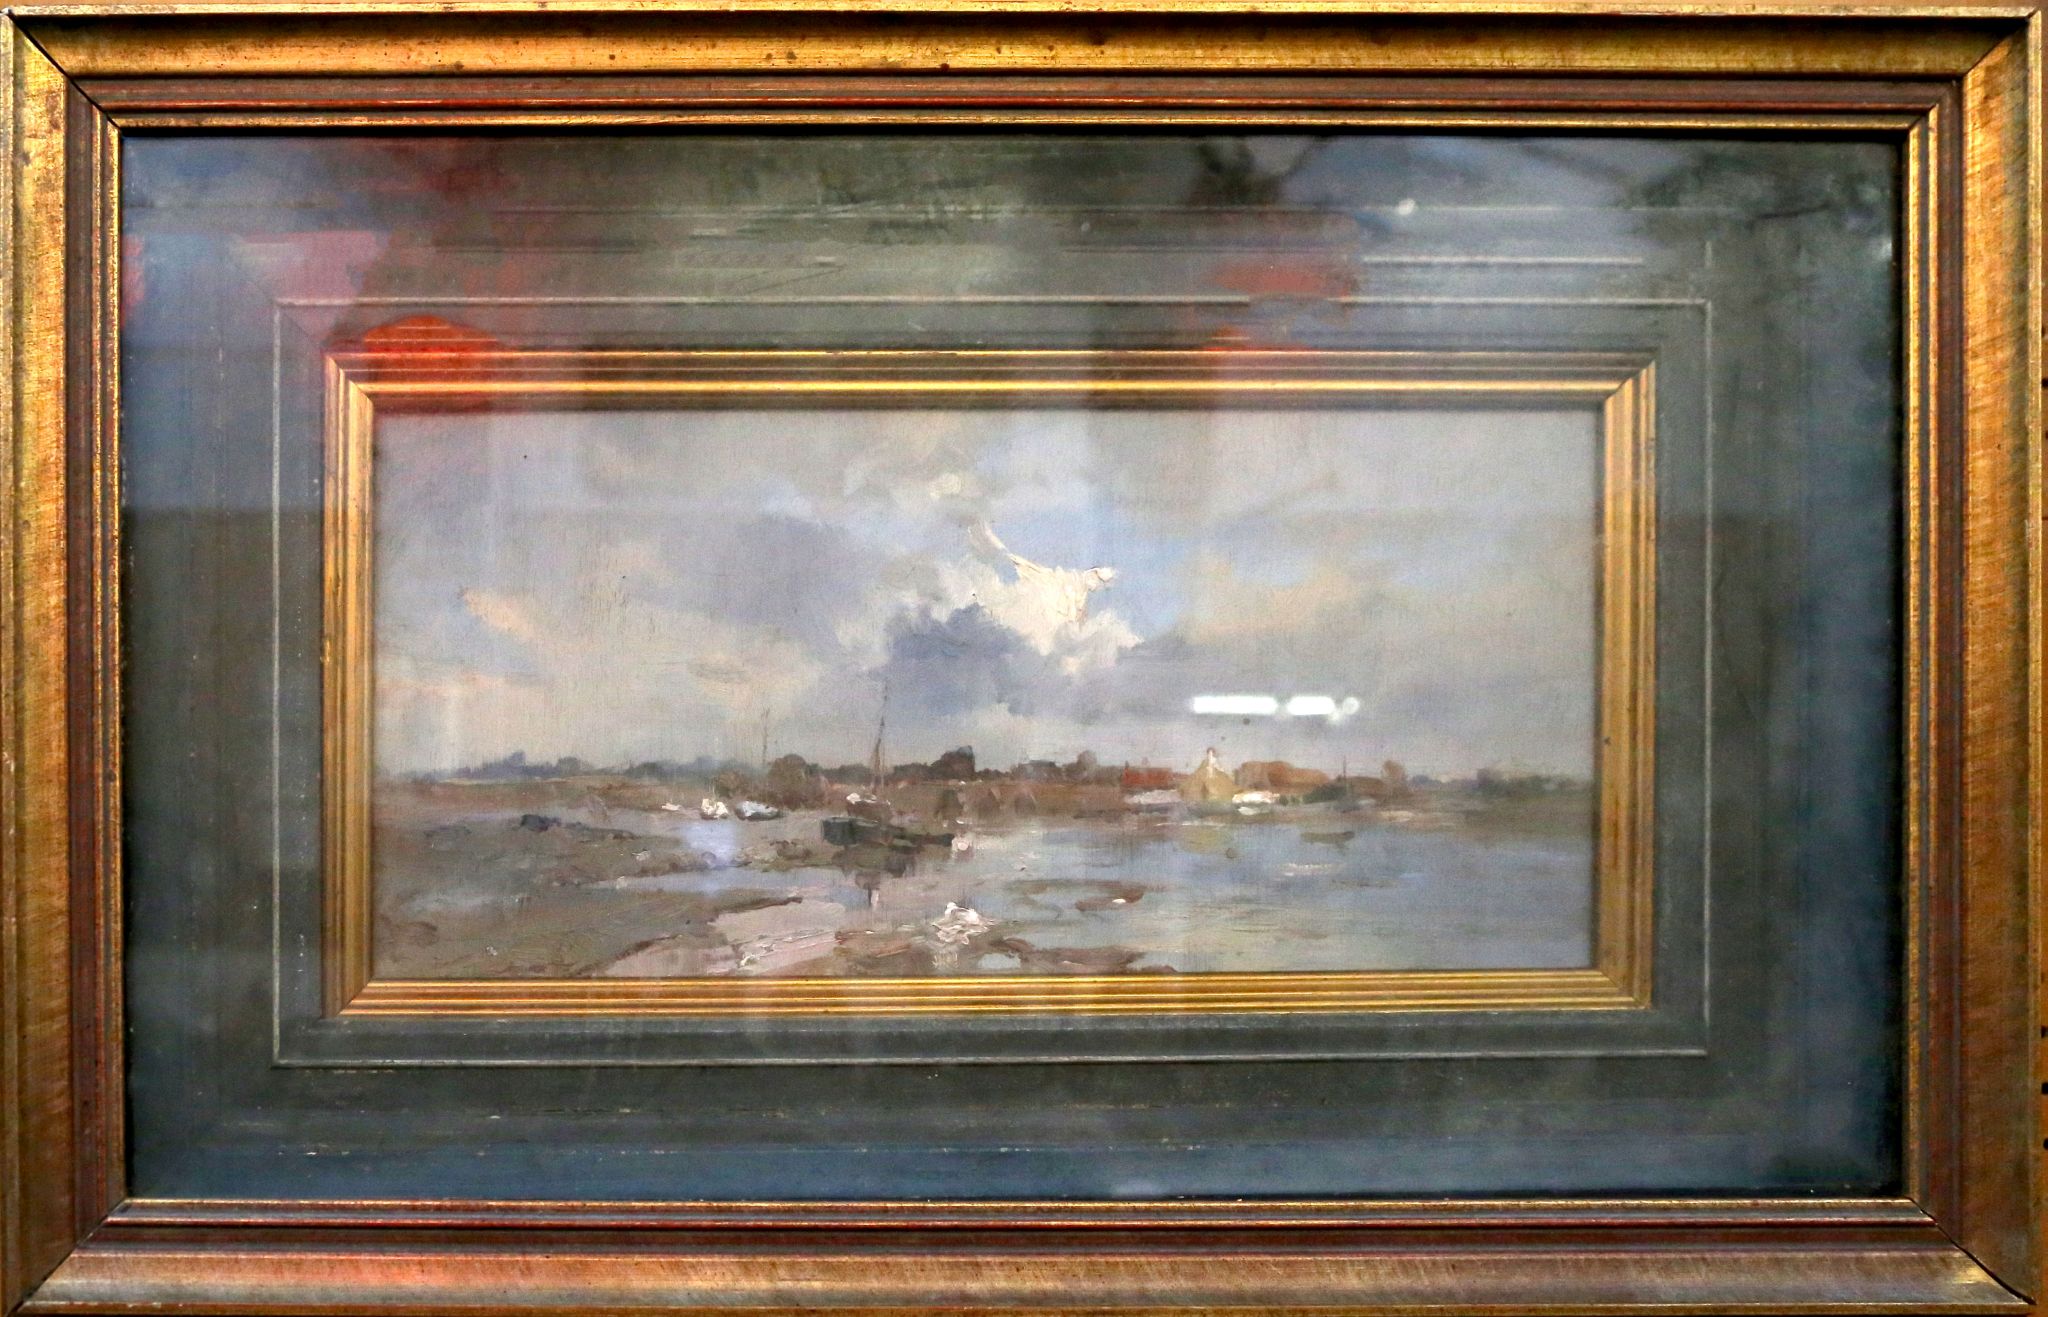 An oil on board, an extensive view of a tranquil English coastal scene, with fishing boats in low